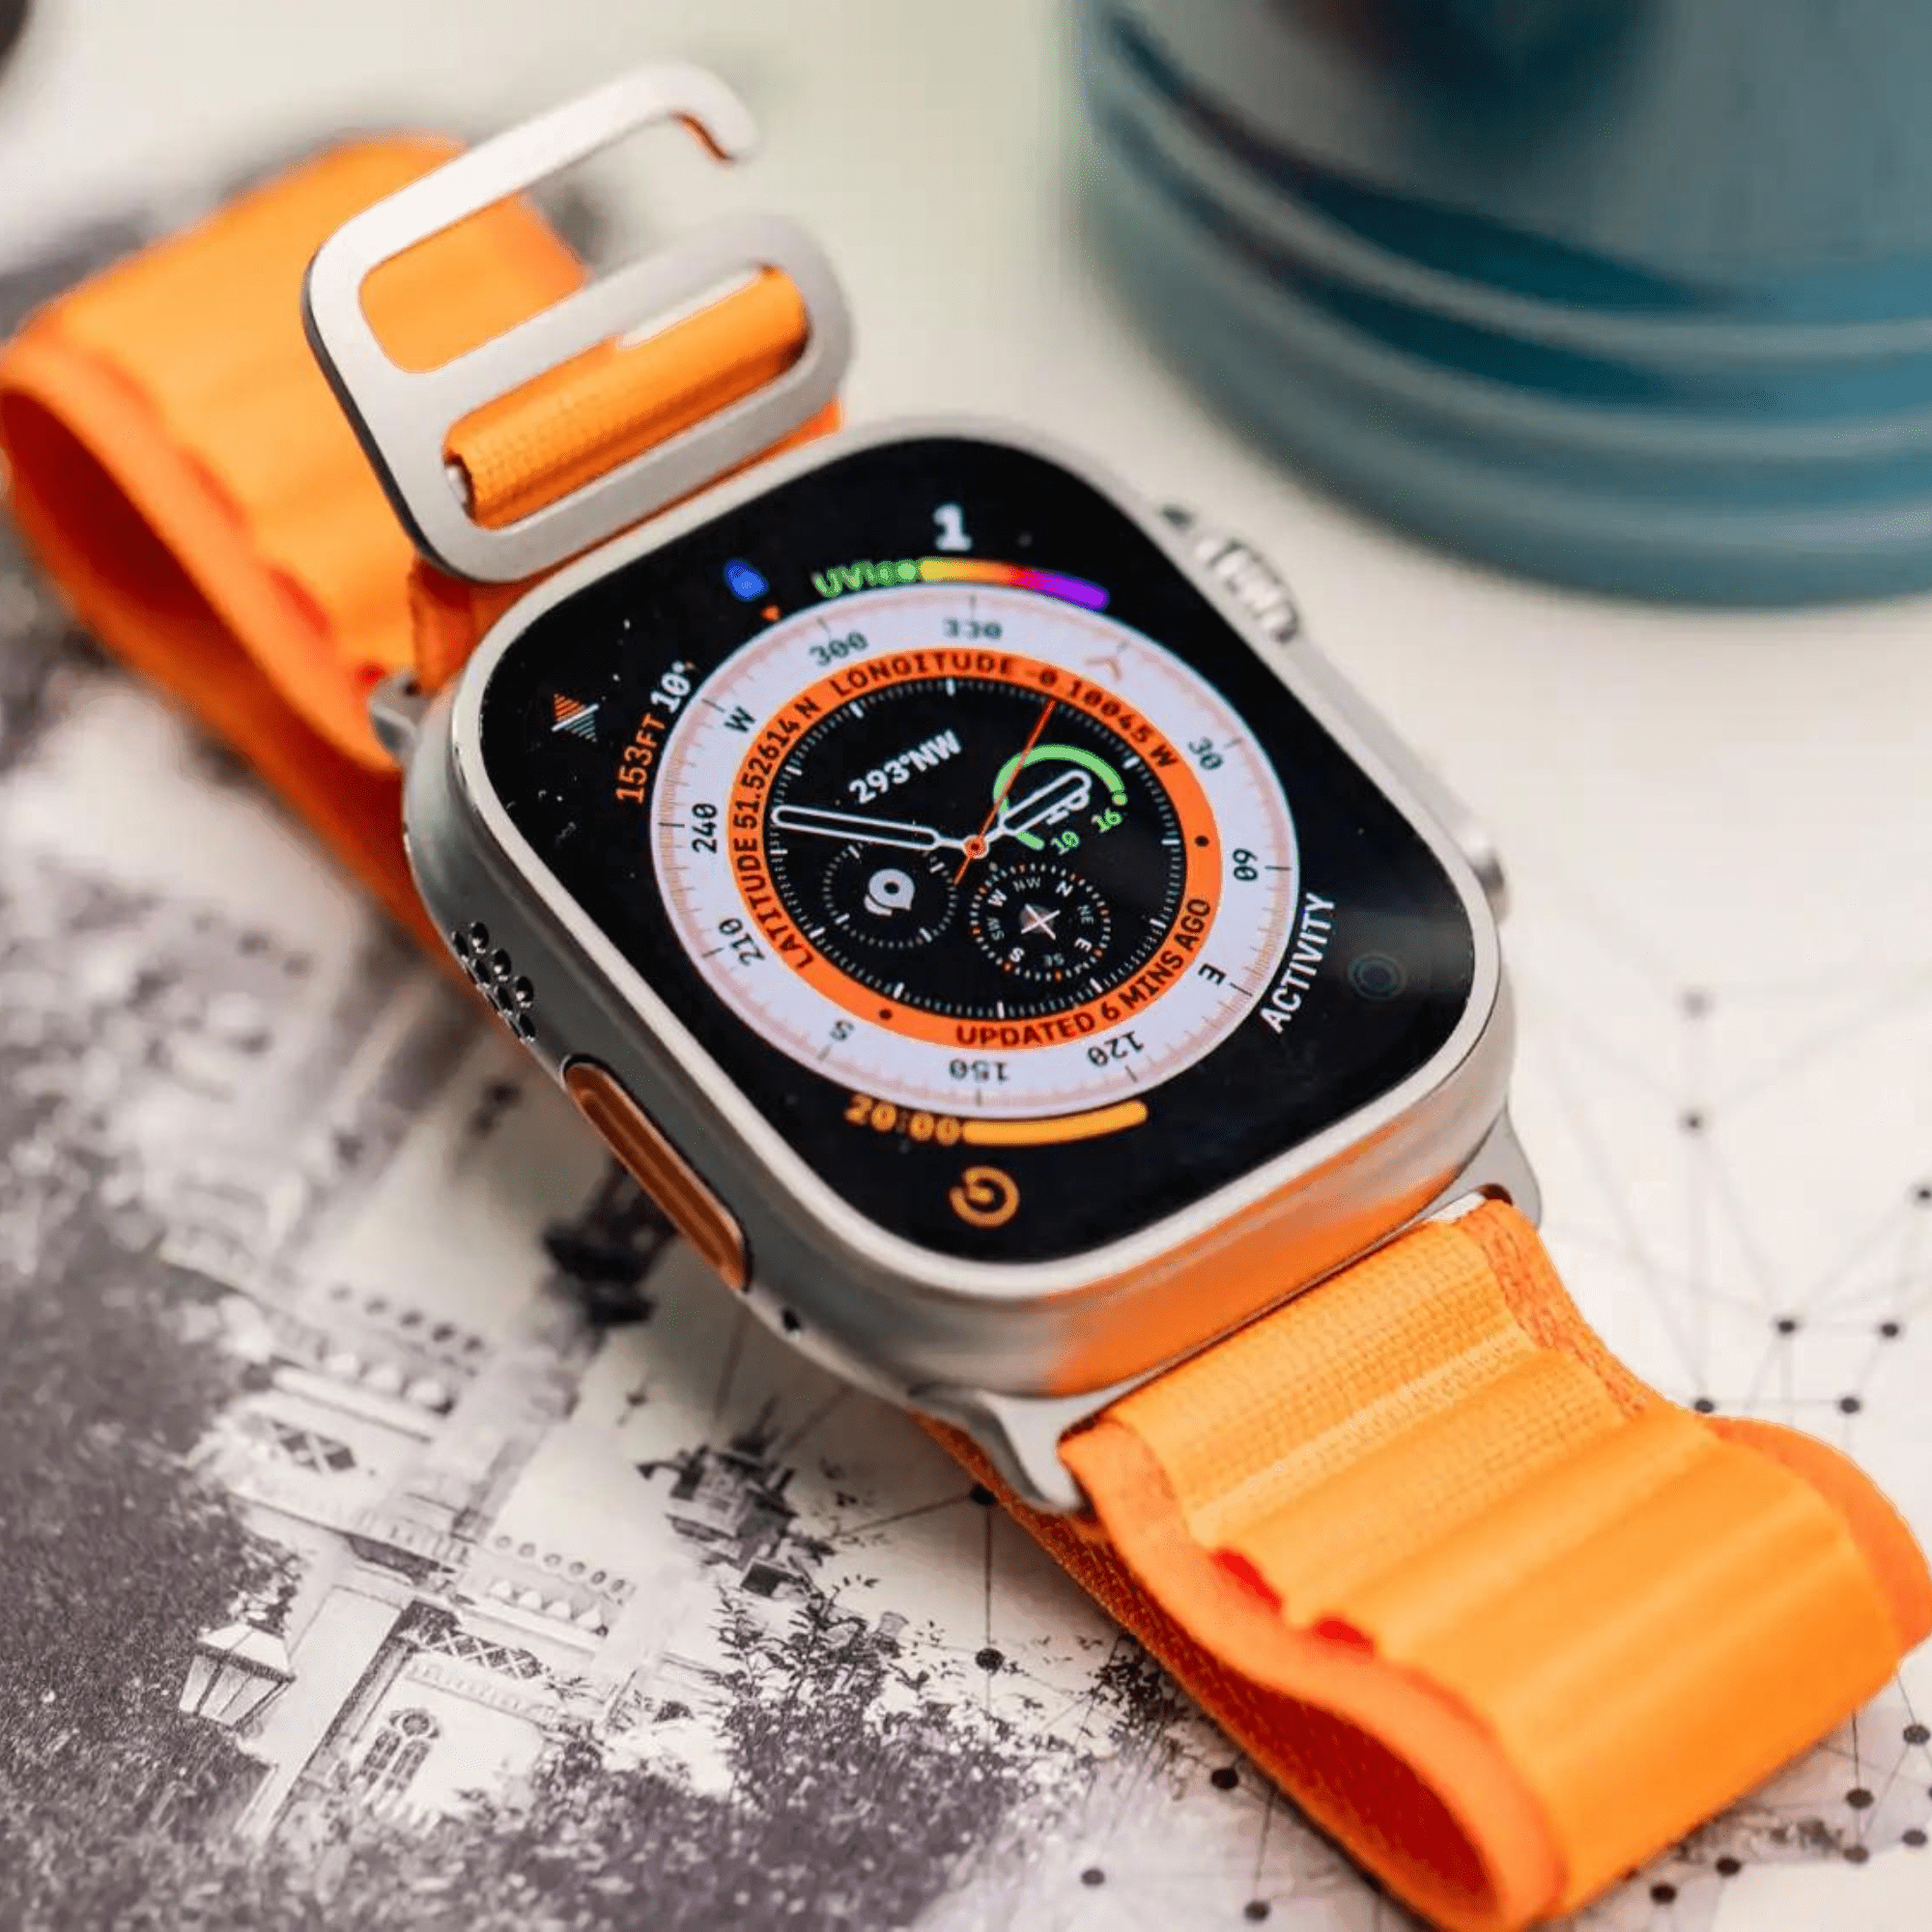 Conversion Kit for Apple Watch - Apple Watch 45mm to Apple watch Ultra 49 mm: Titanium Style Case + Alpine Loop Band mod kits india dream watches apple watch